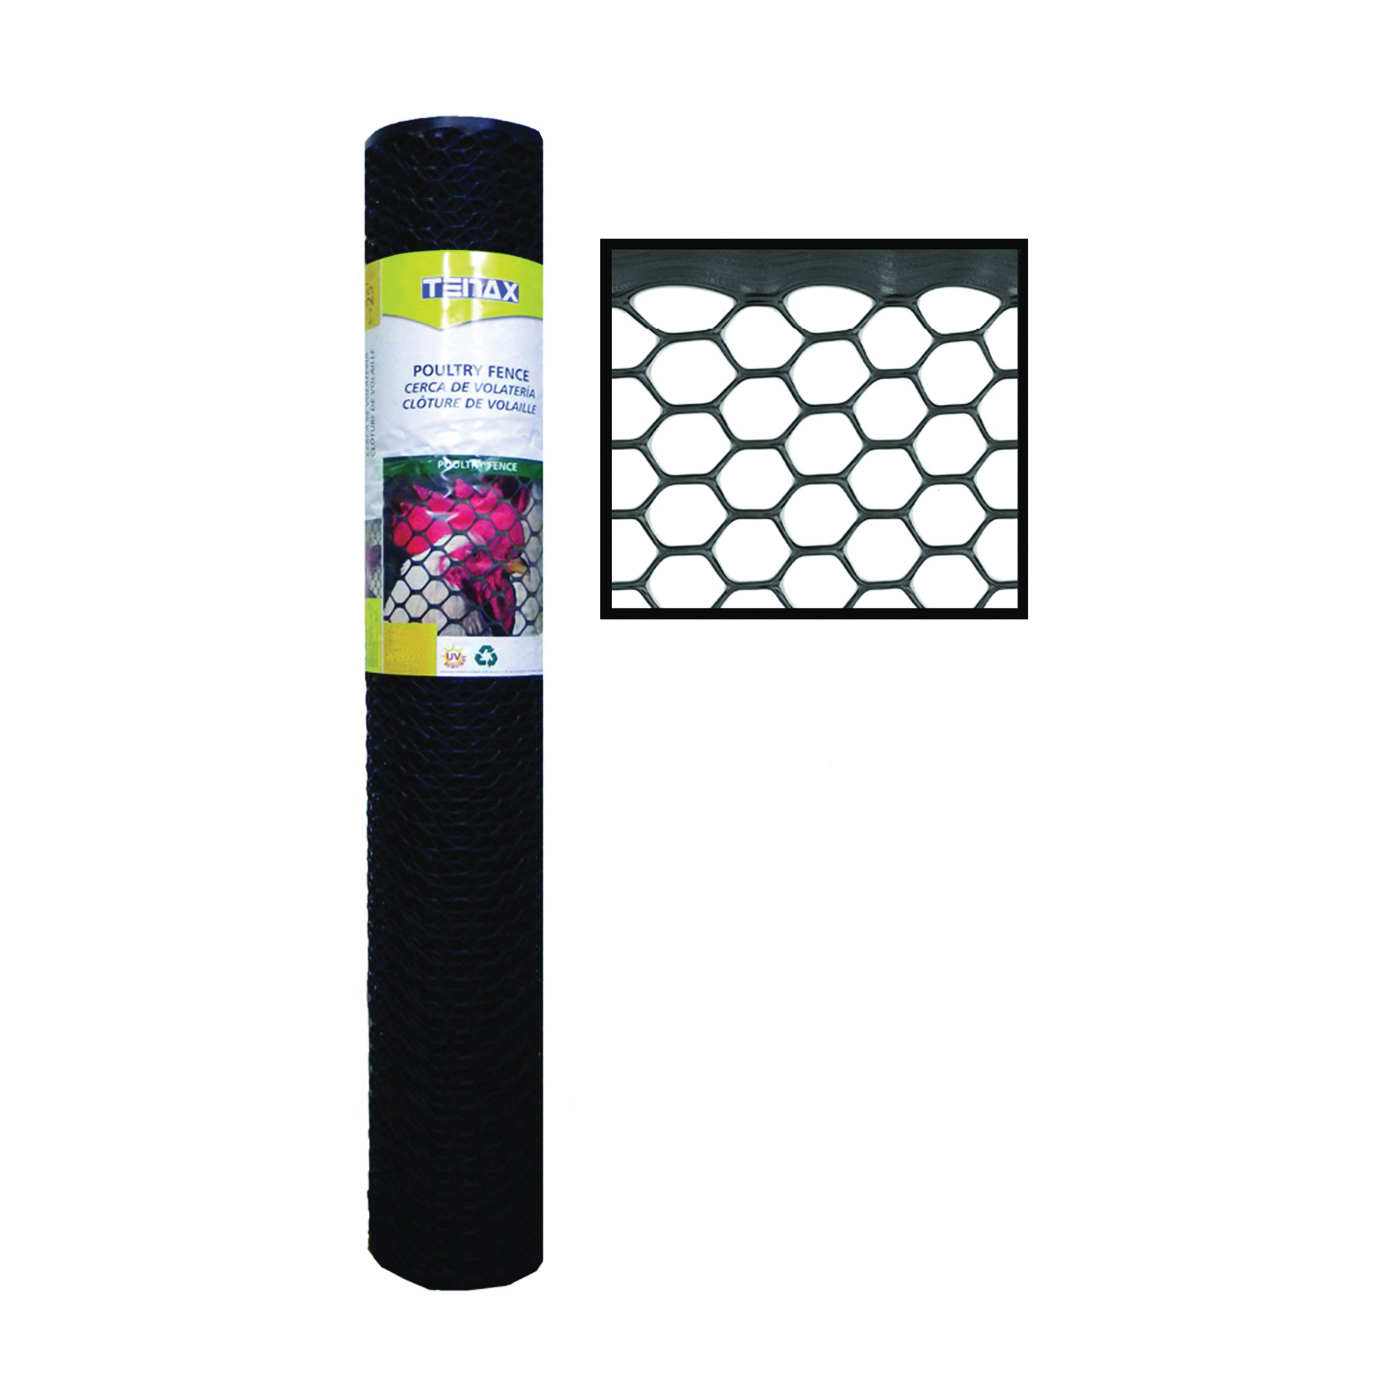 72120346 Poultry Fence, 50 ft L, 4 ft W, 3/4 x 3/4 in Mesh, Plastic, Black